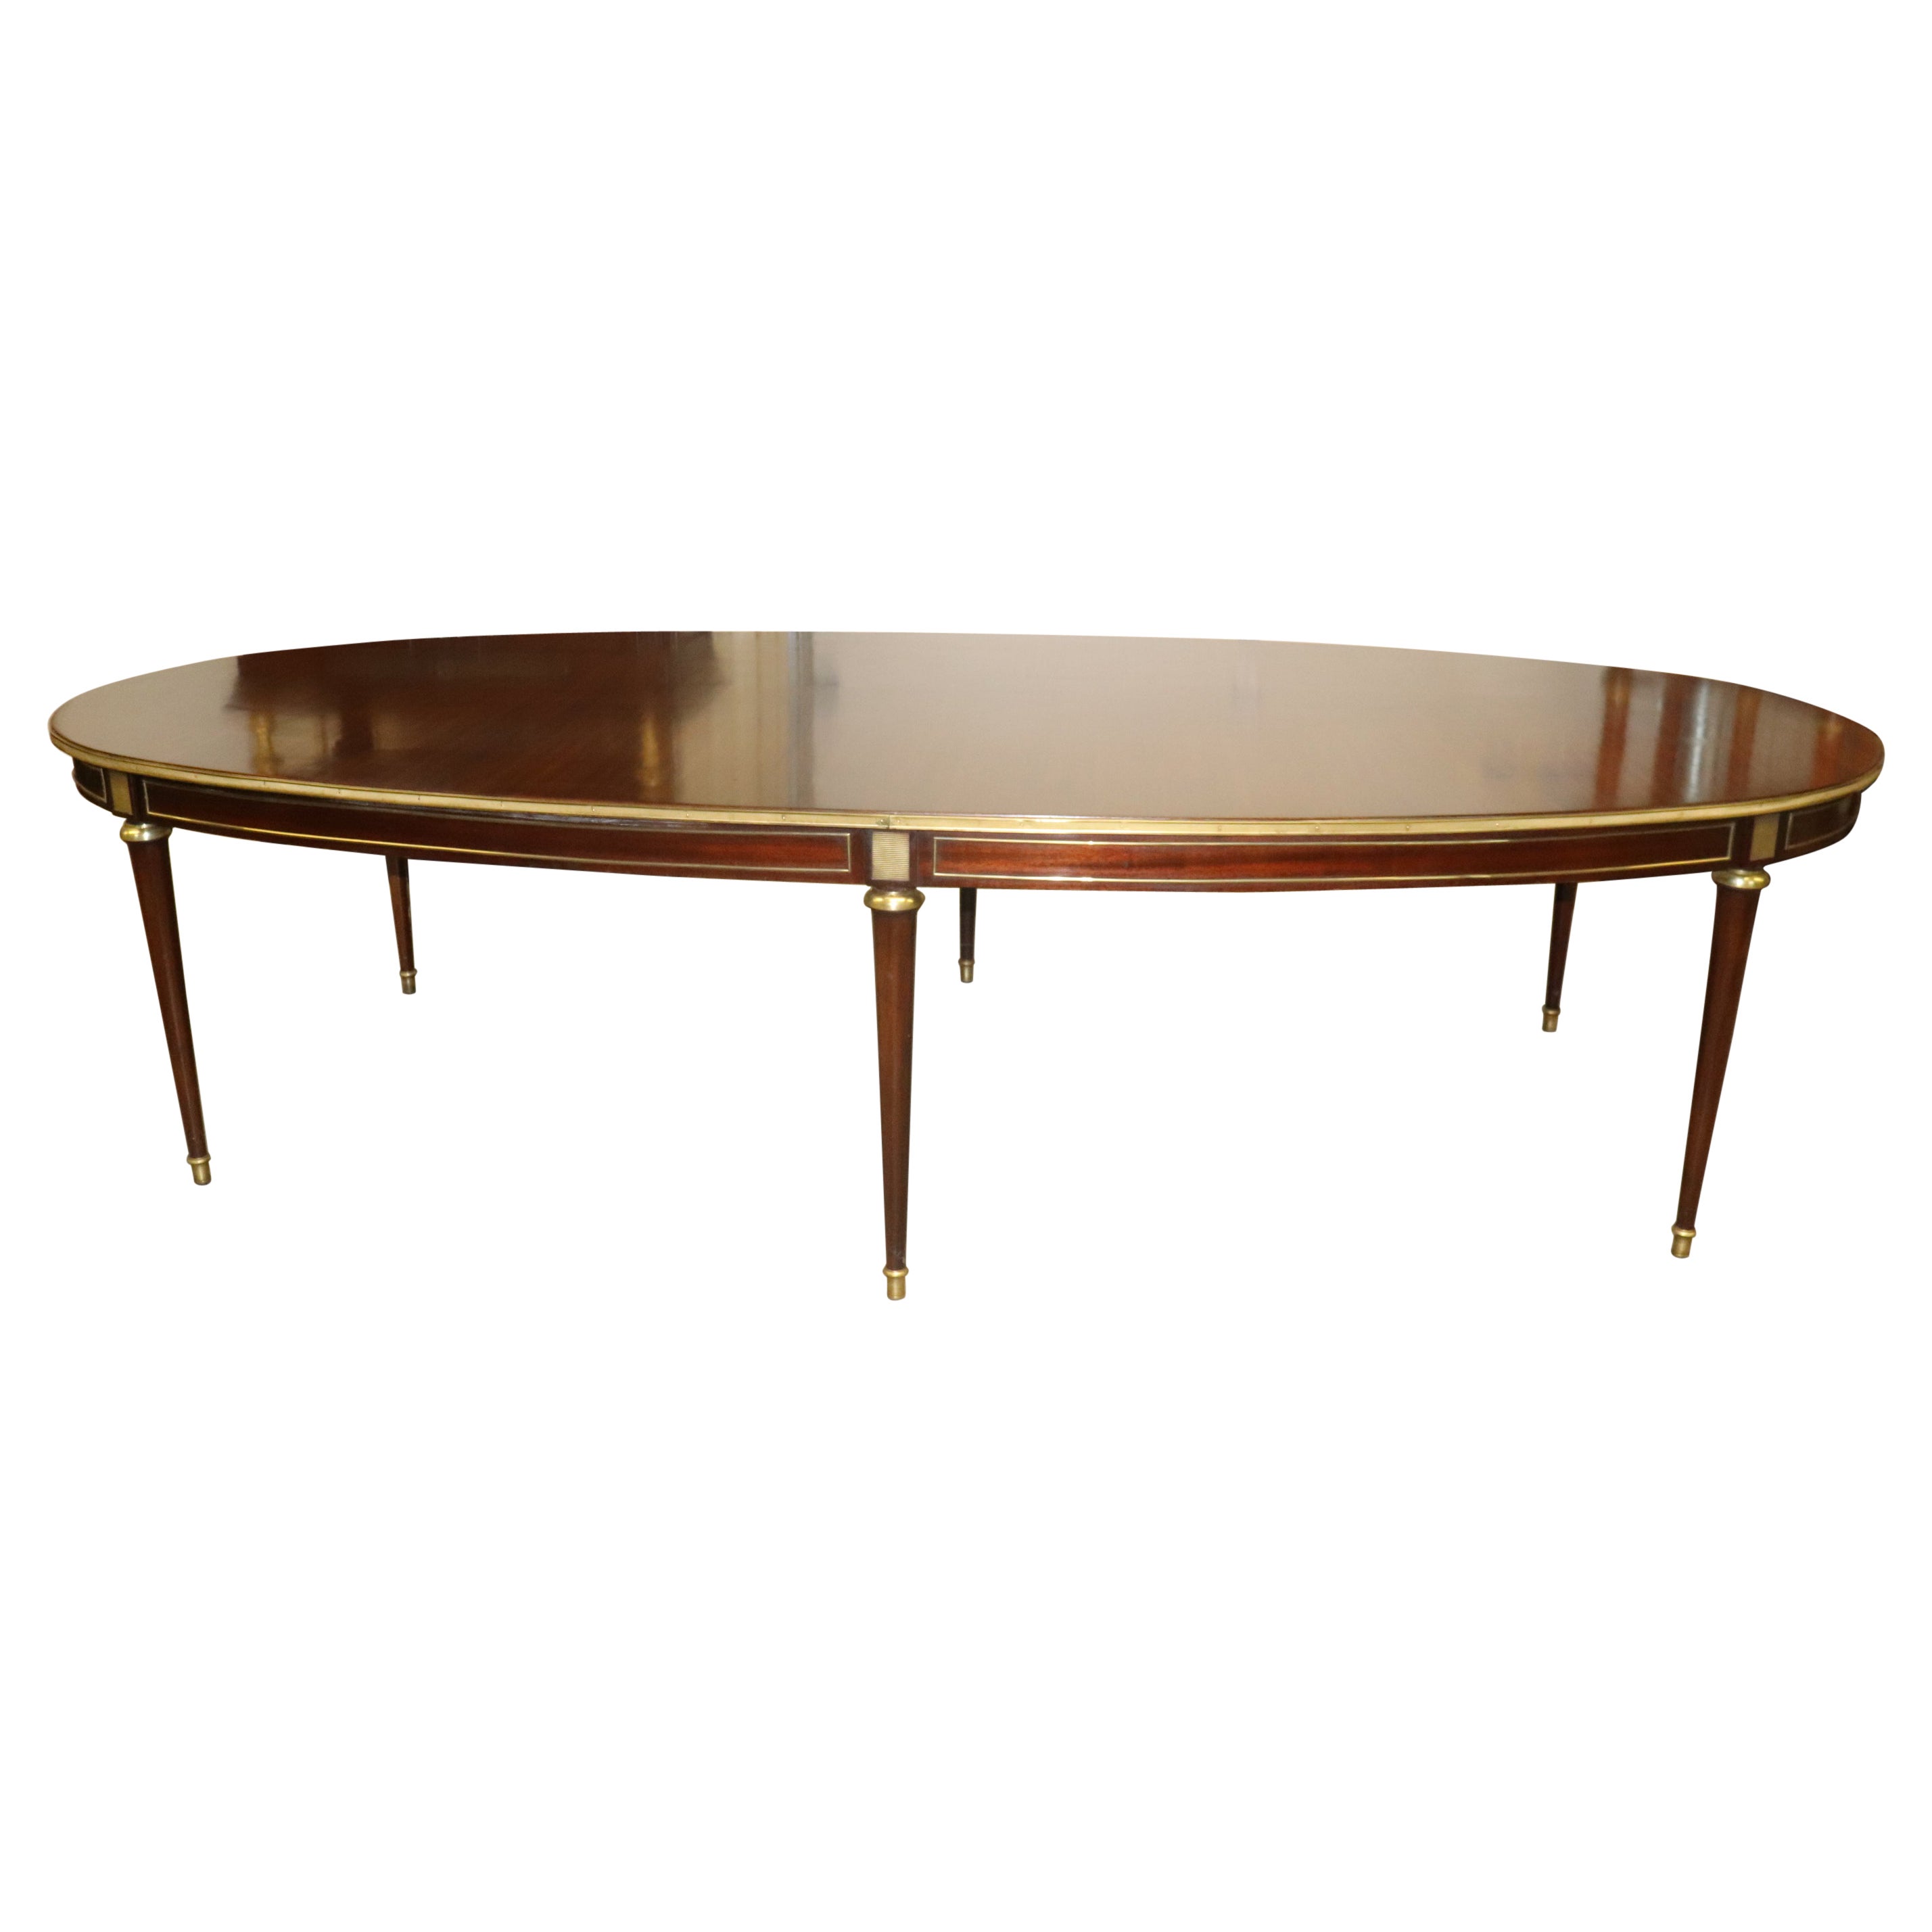 Fantastic Brass Ornamented Oval Mahogany French Louis XVI Dining Table